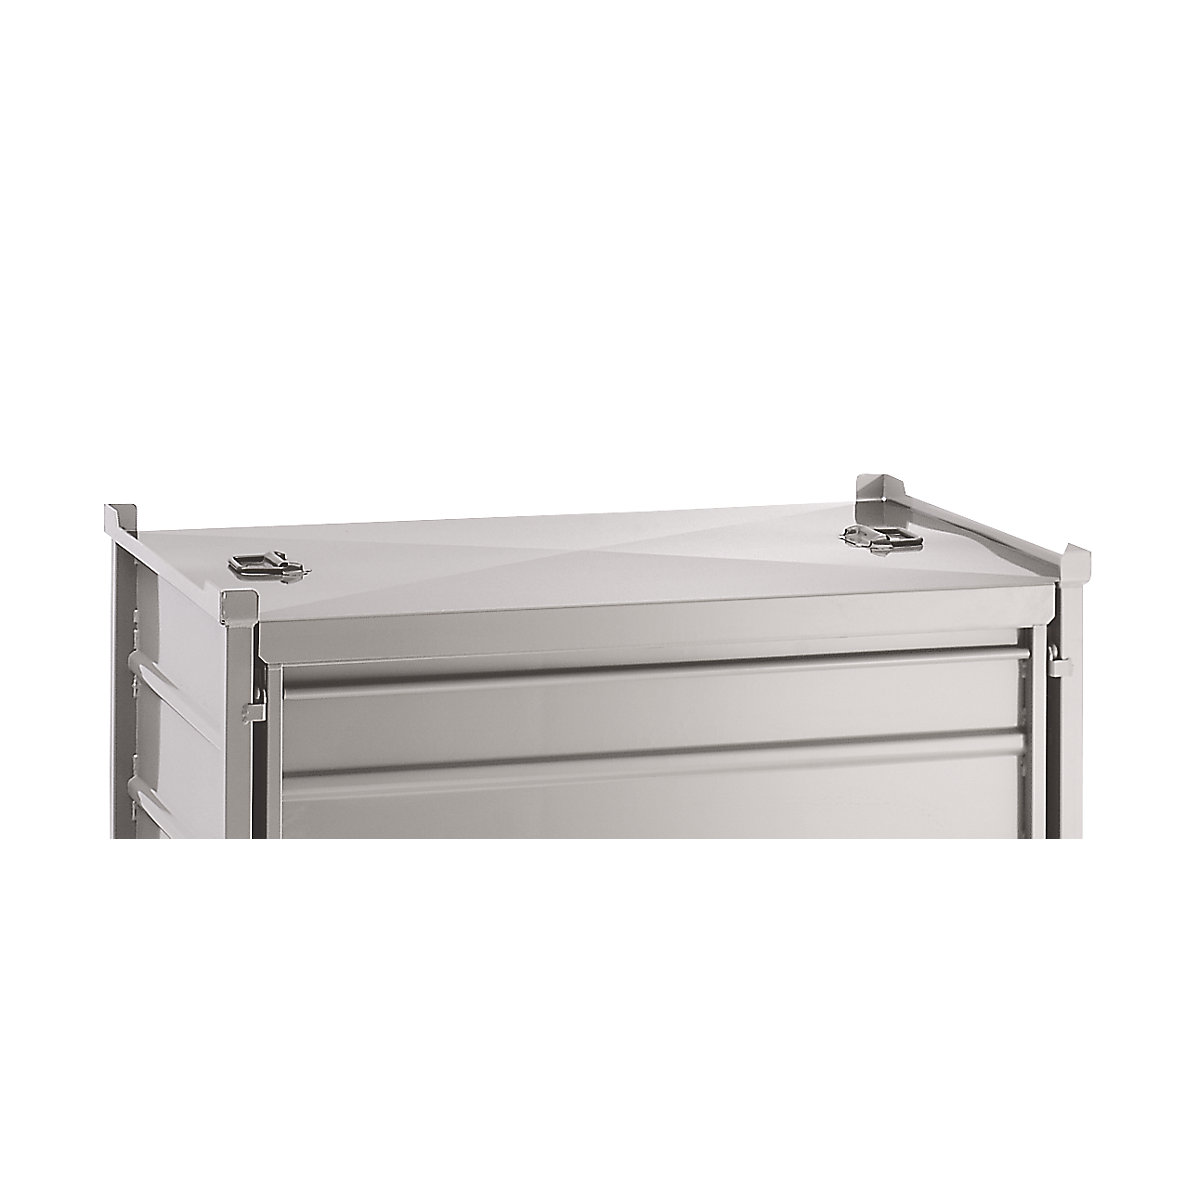 Lid for collapsible stacking box with sheet steel side panels